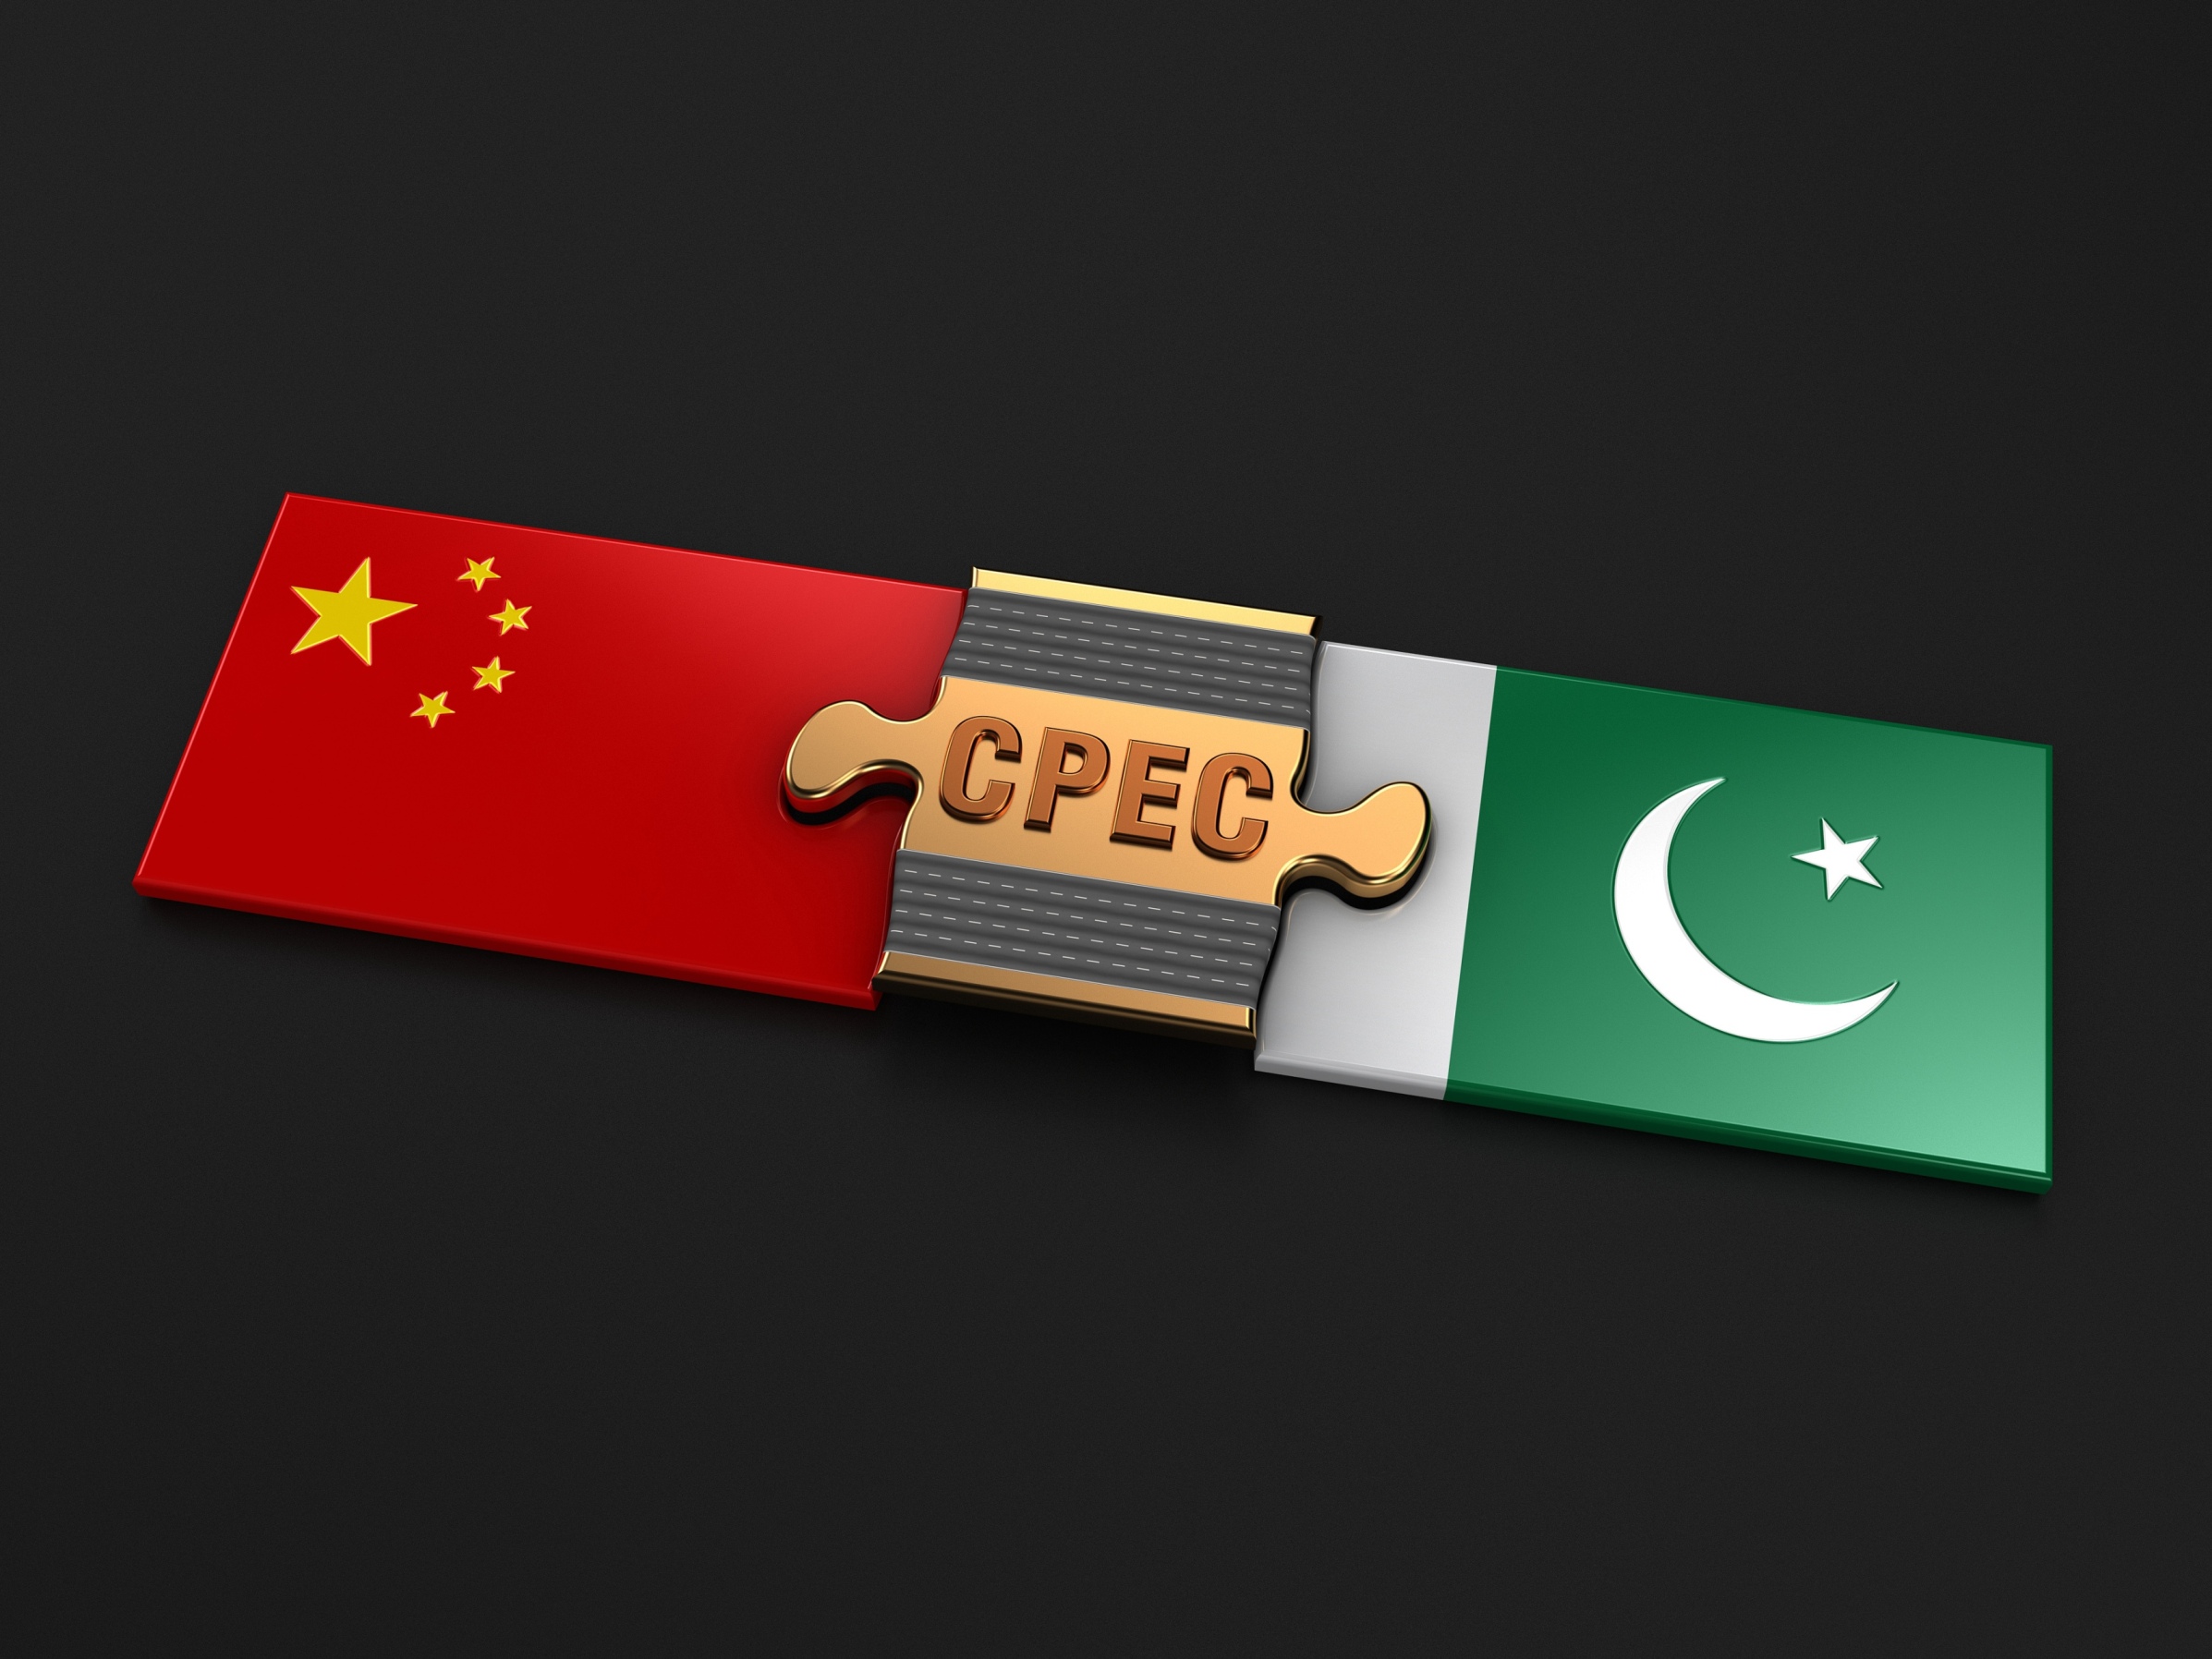 China and Pakistan, connected by CPEC